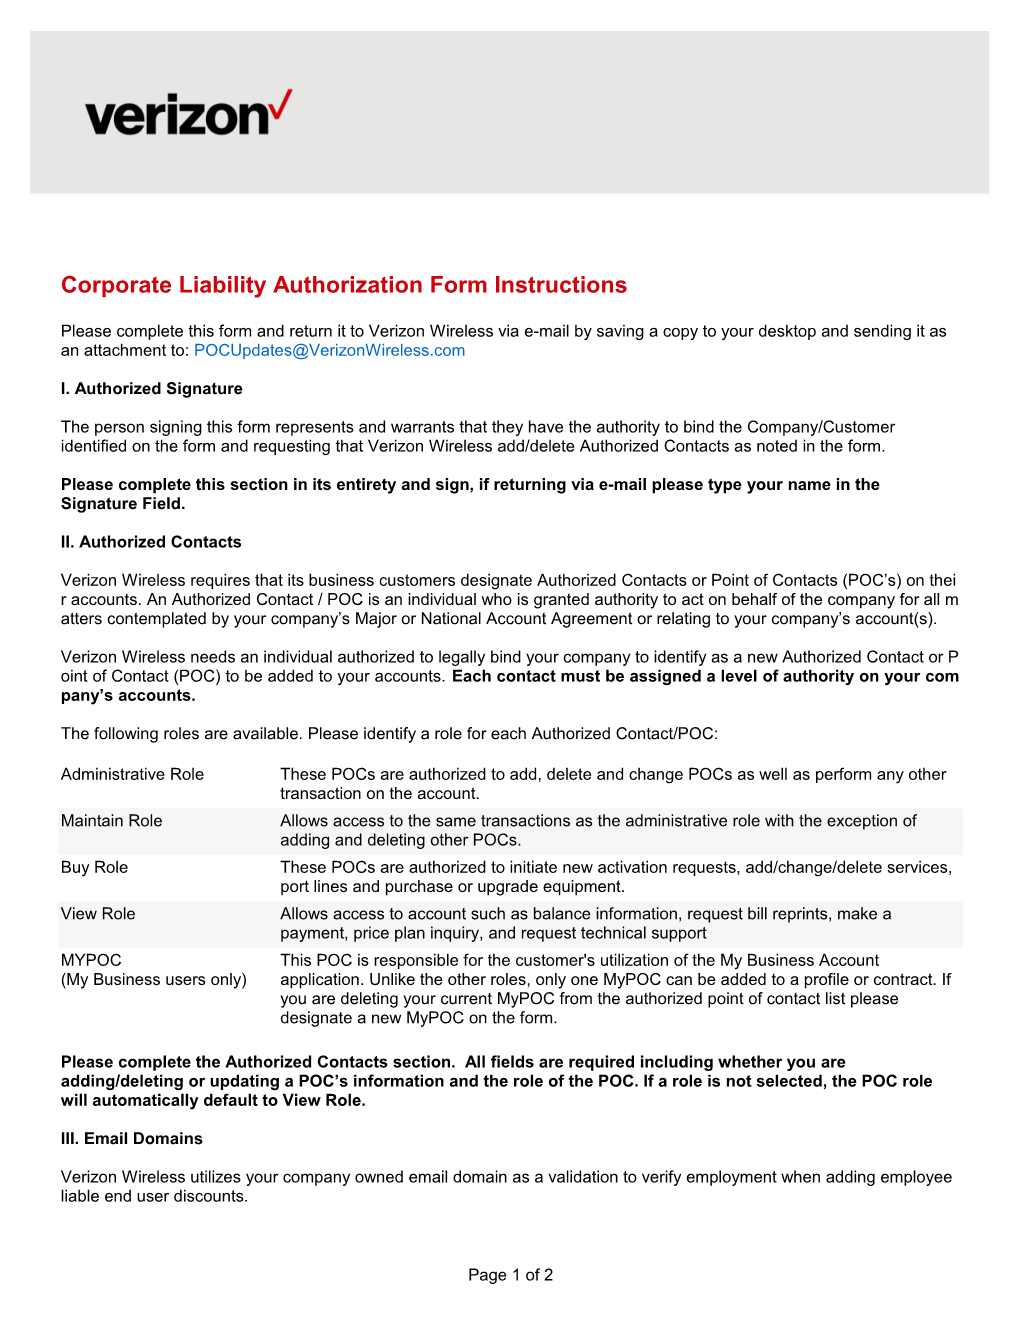 Corporate Liability Authorization Form Instructions